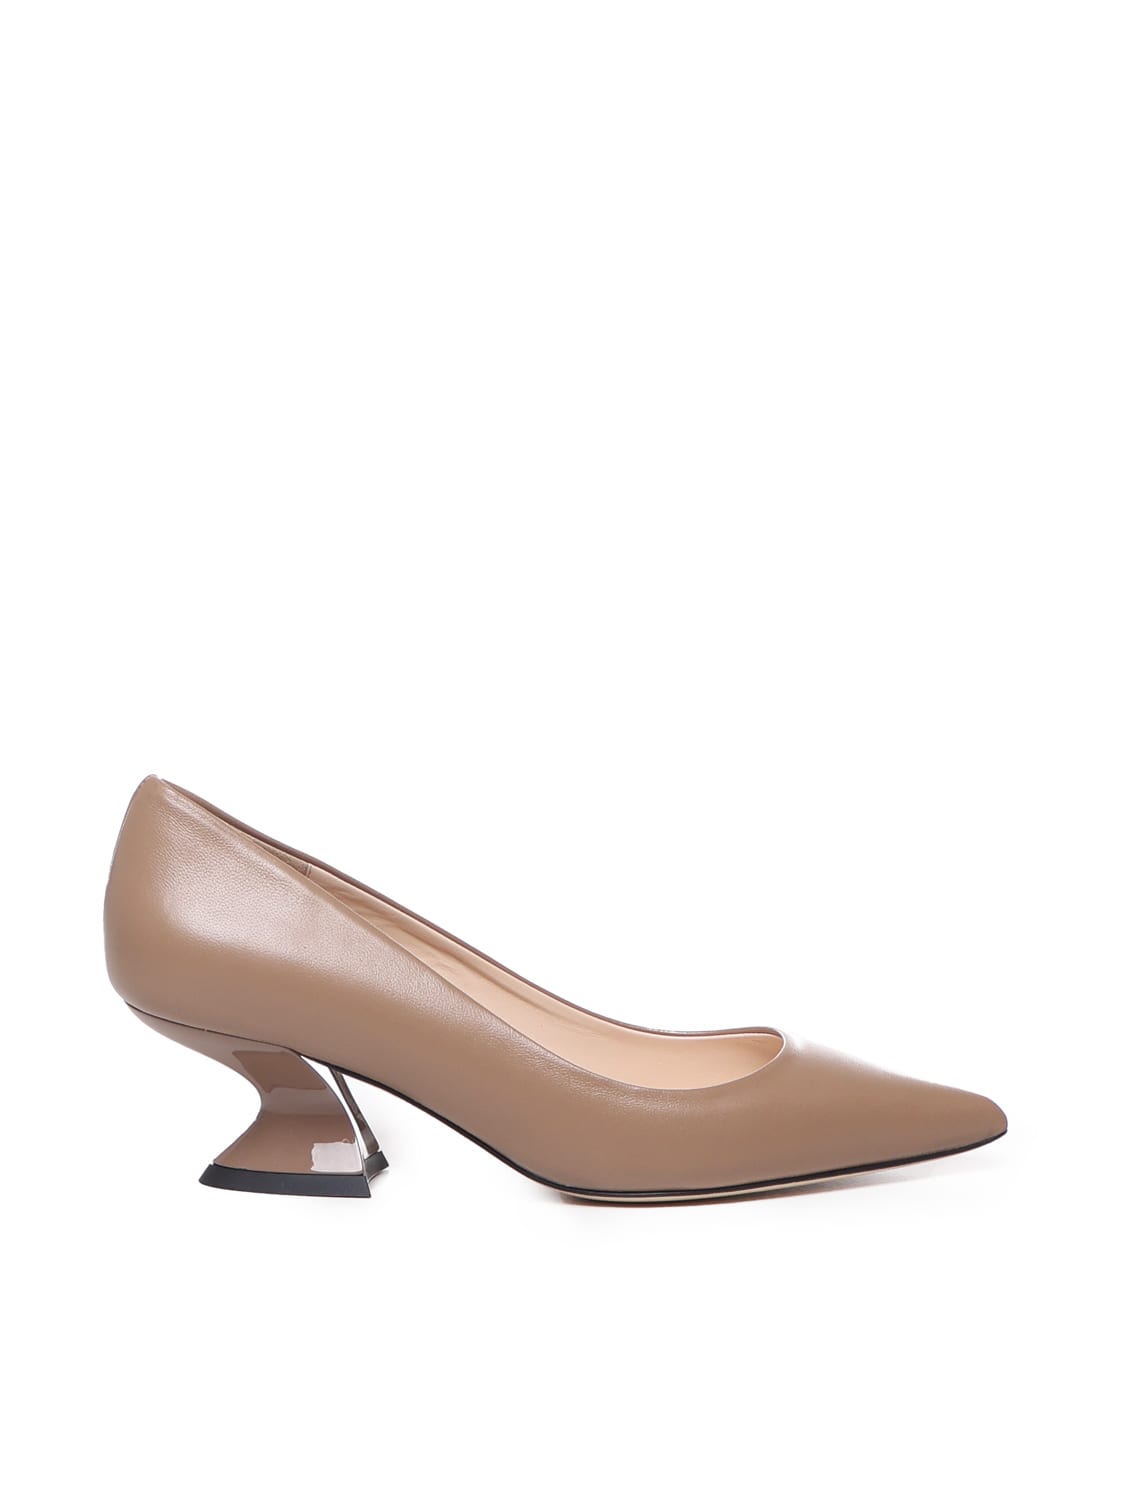 Alchimia Leather Pumps With Wide Heel In Nude